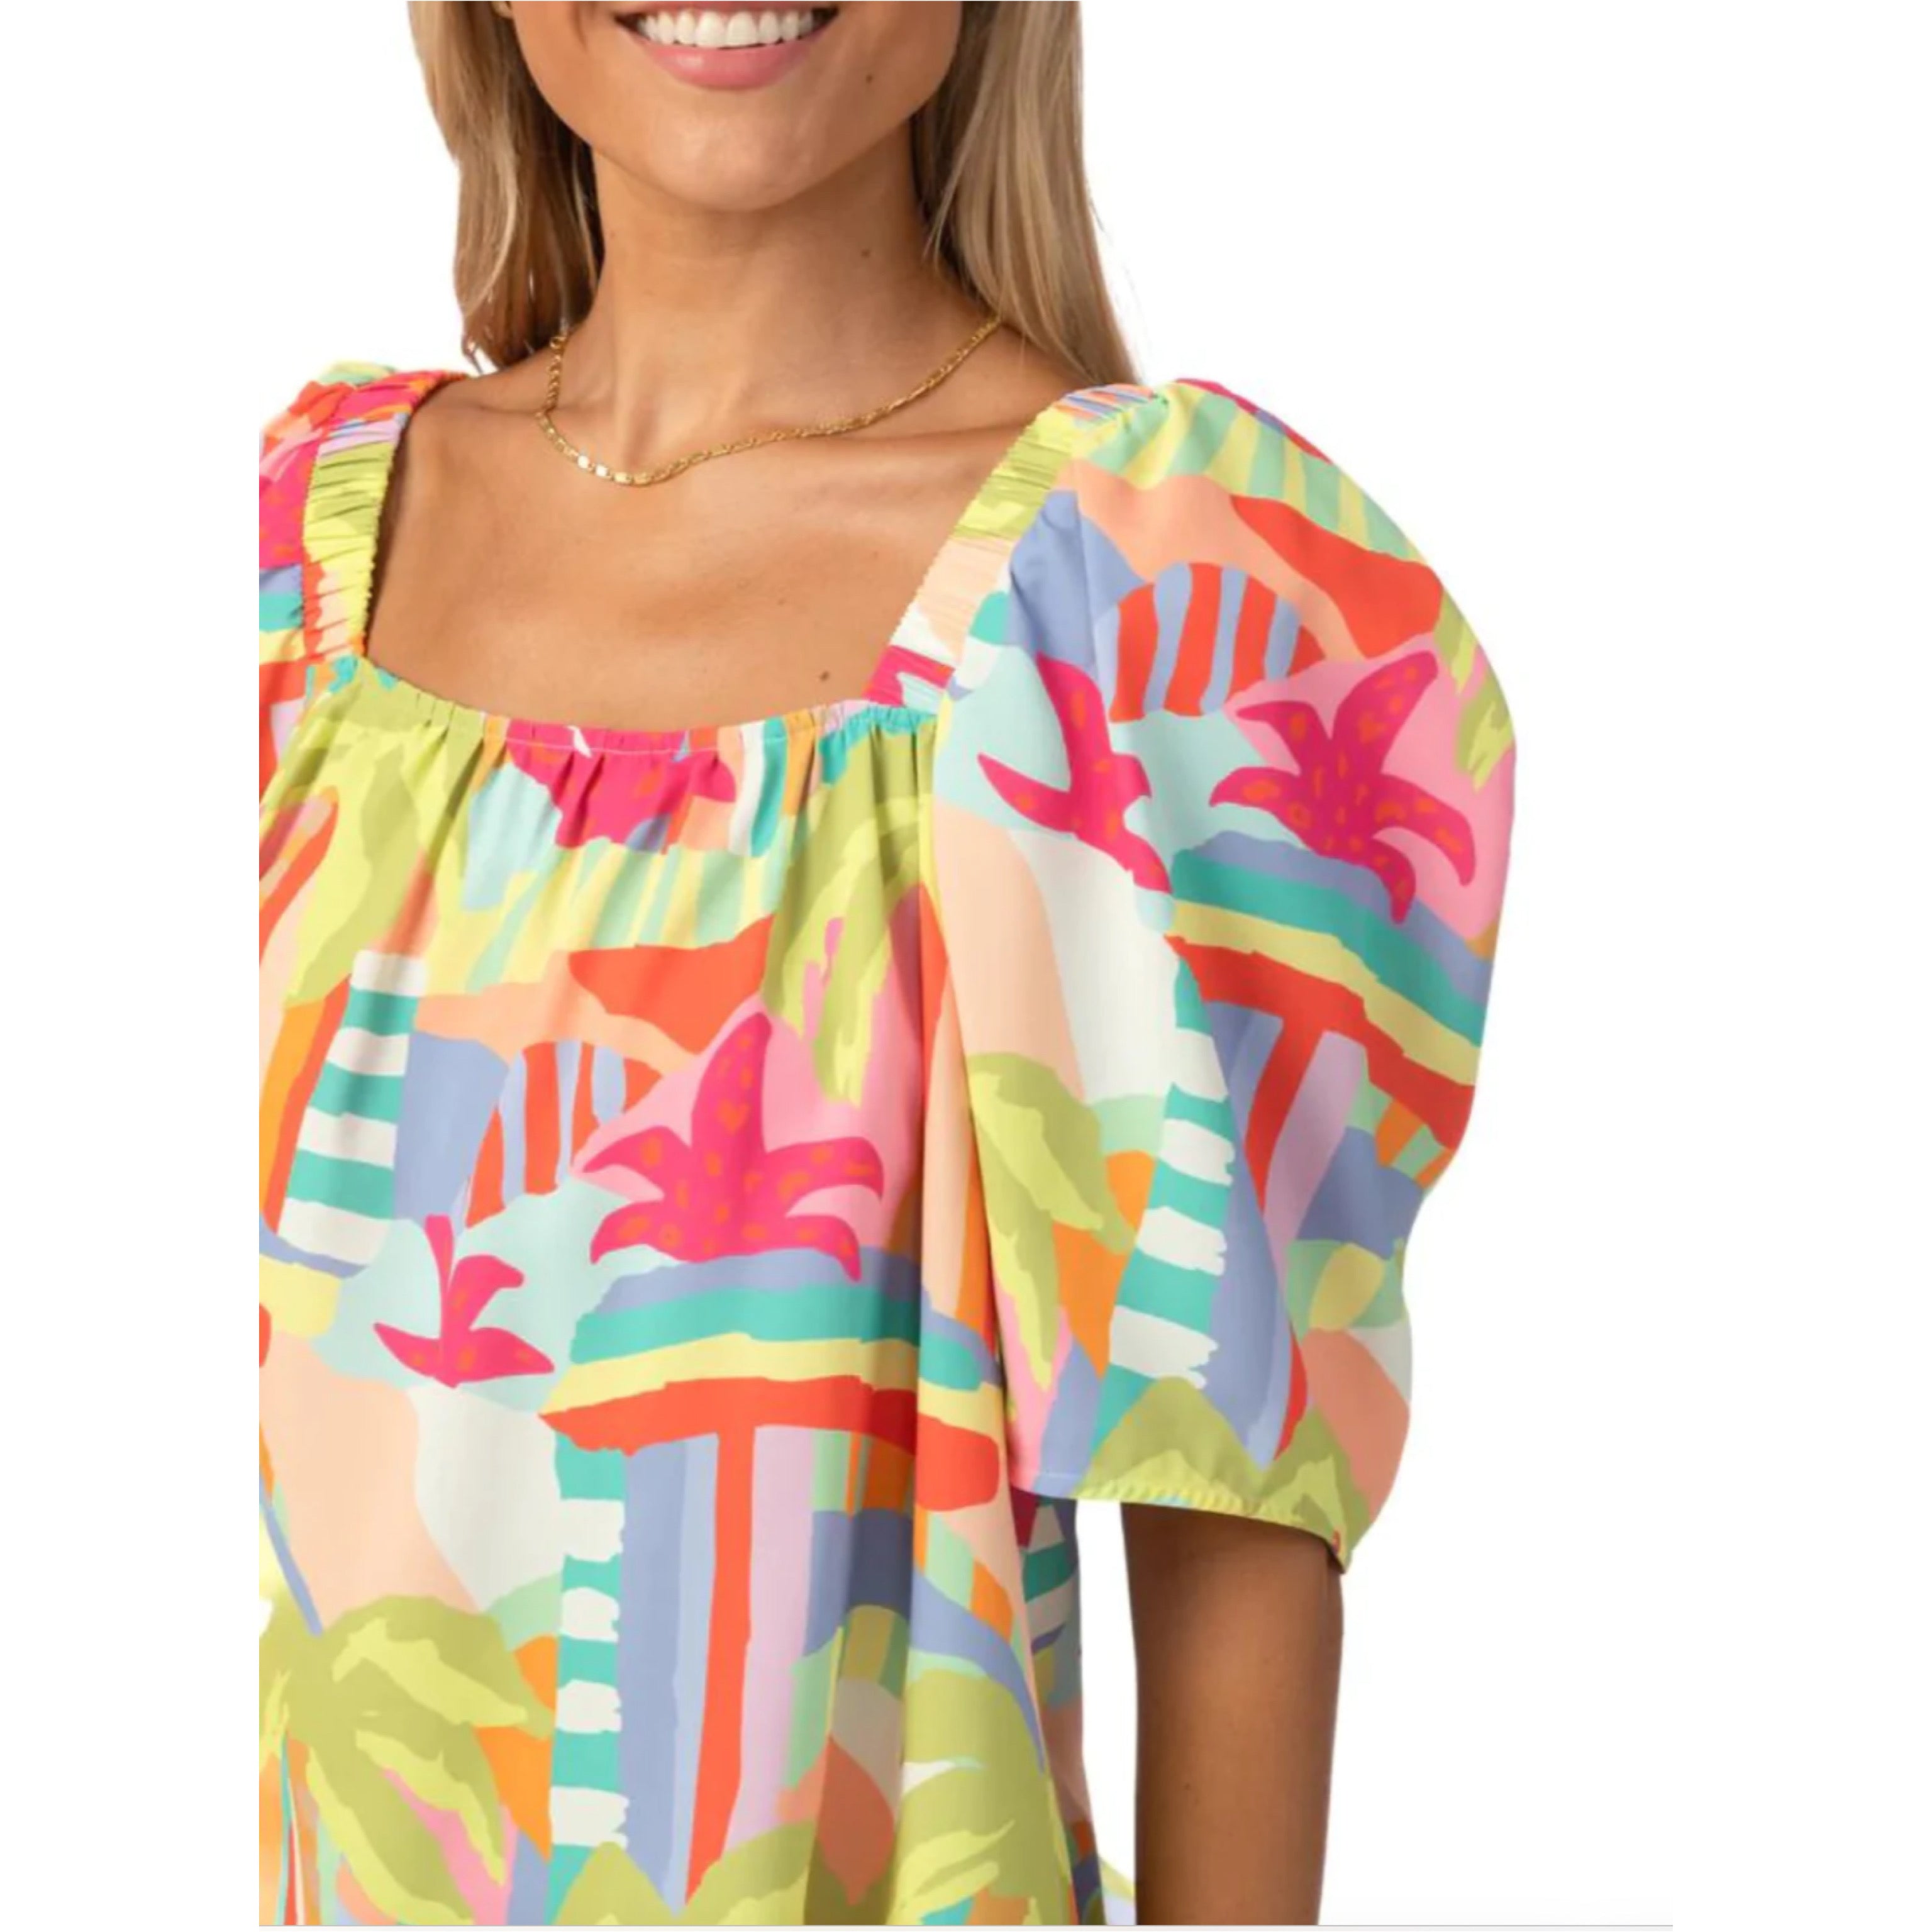 Crosby bright print blouse, size S